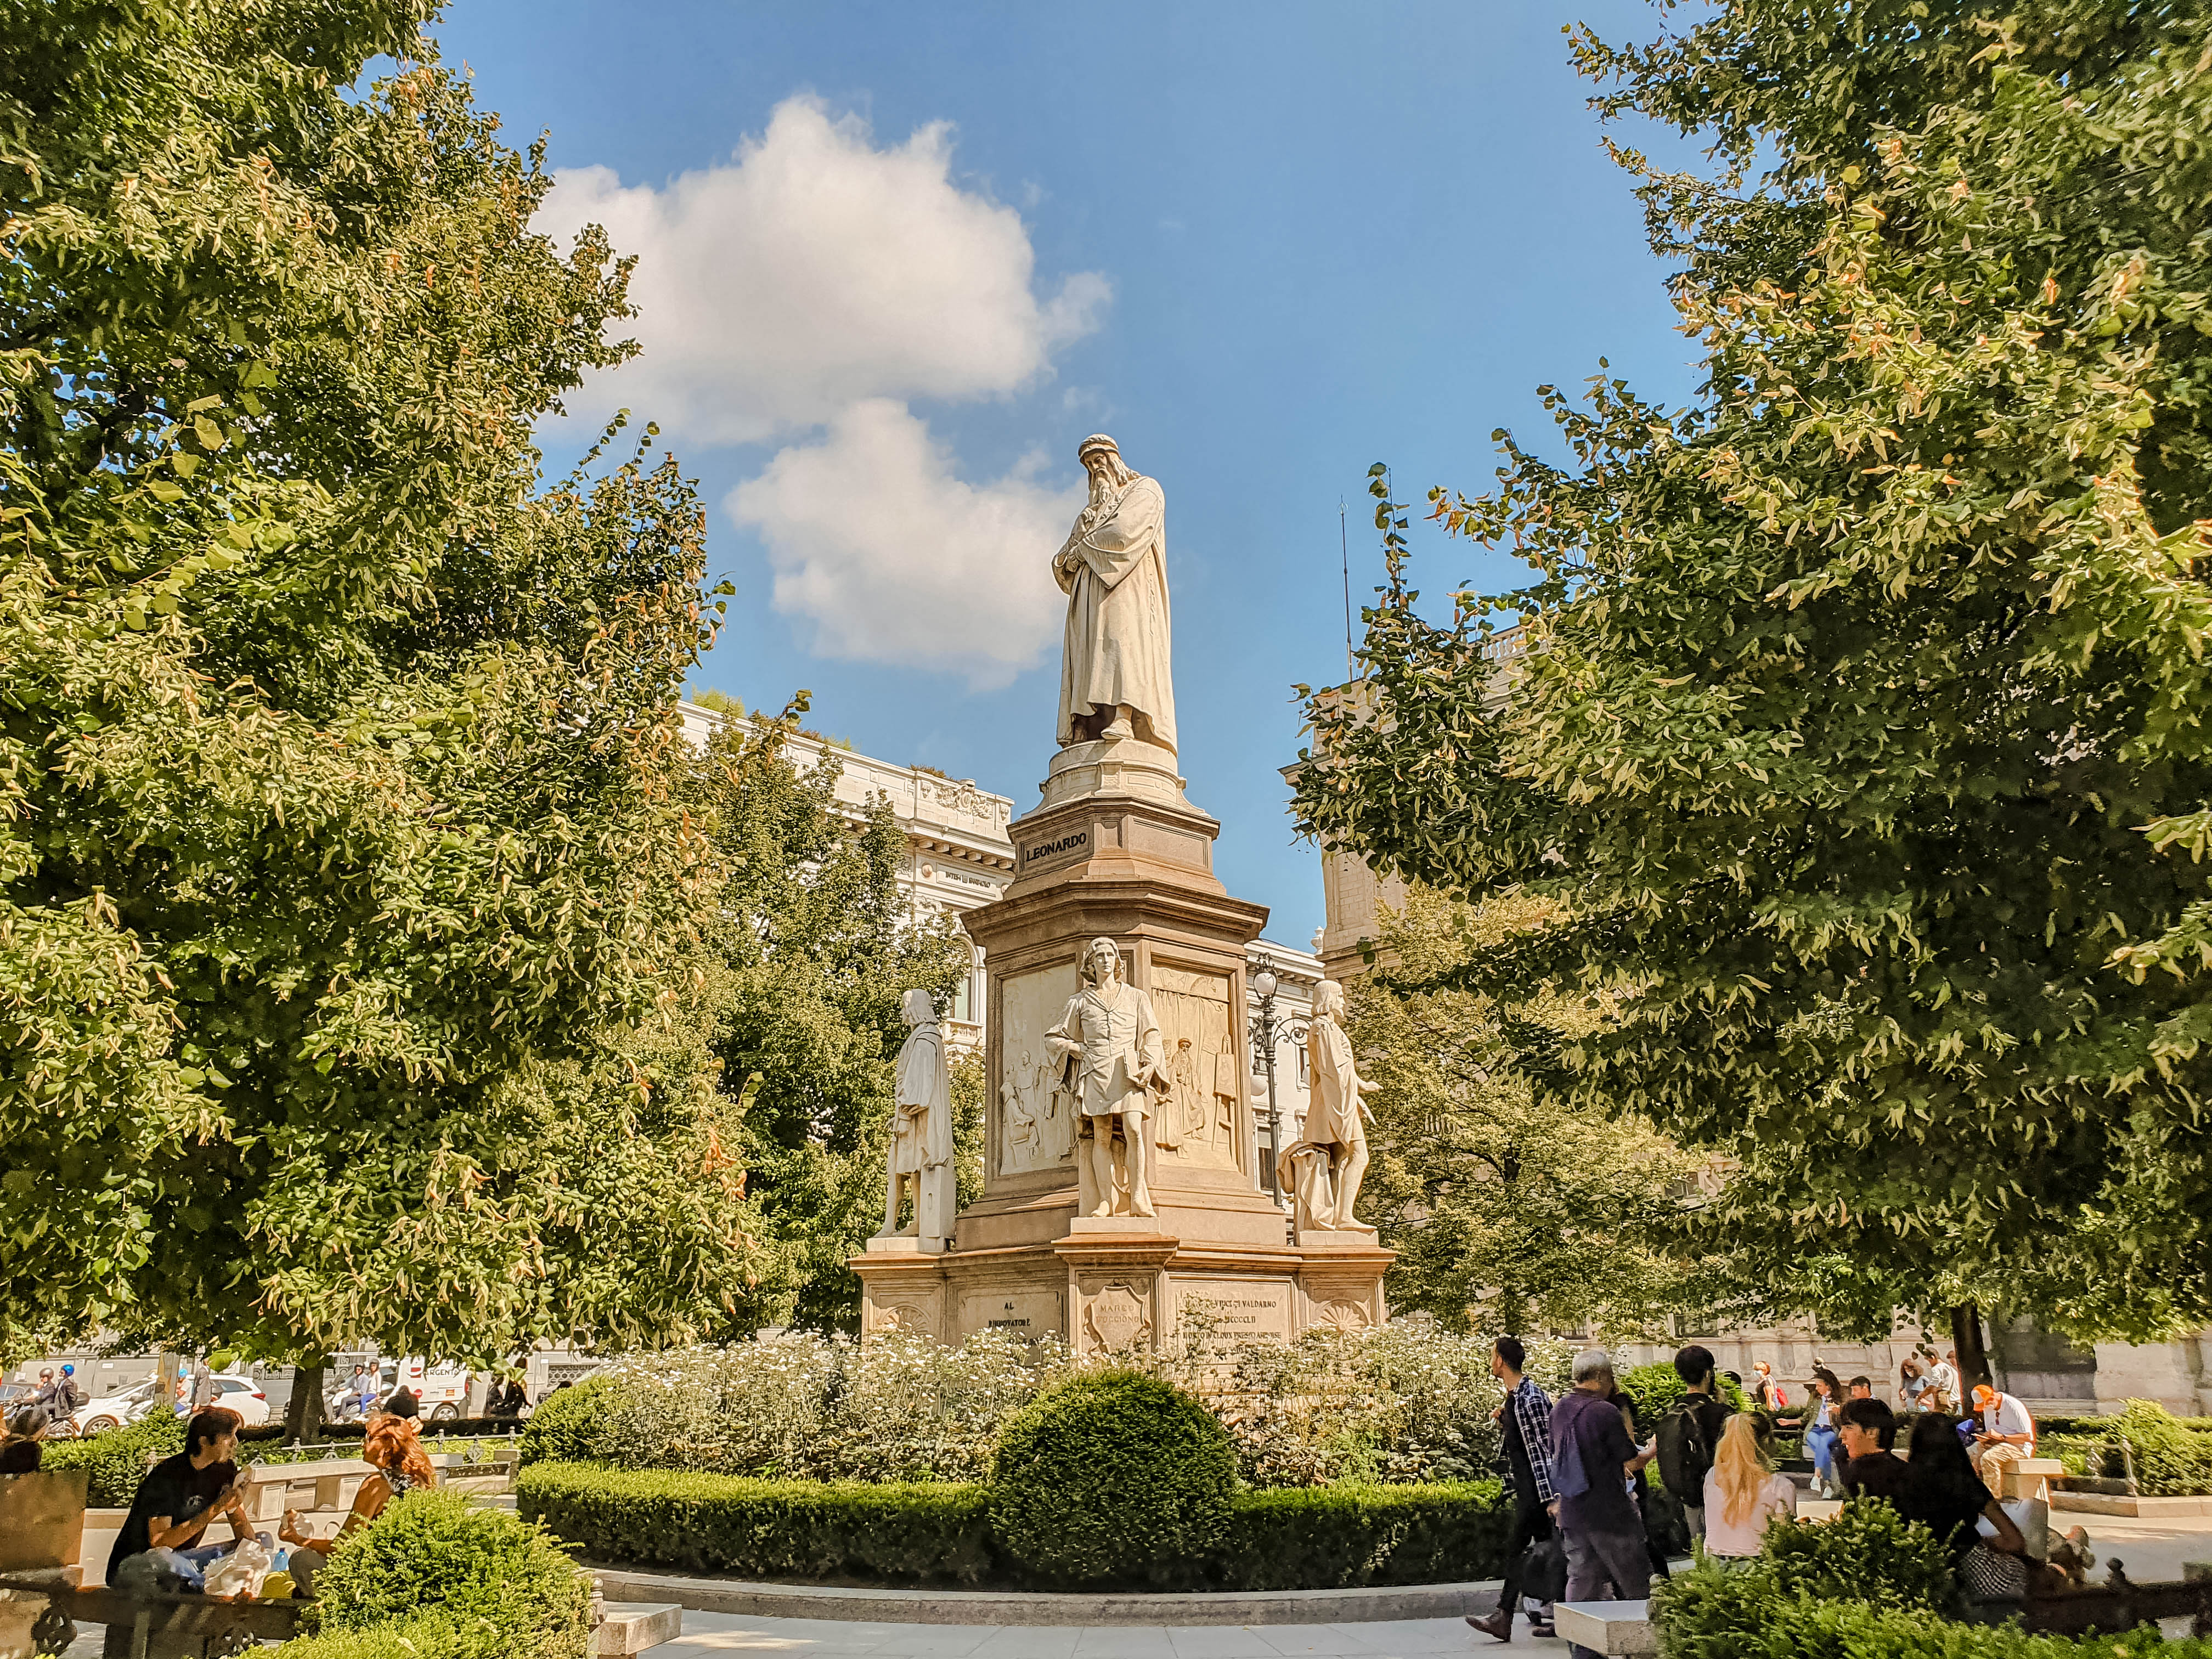 A statue of Leonardo da Vinci stands tall in a park. Greenery surrounds the statue, and people can be seen enjoying the park and sunny day.